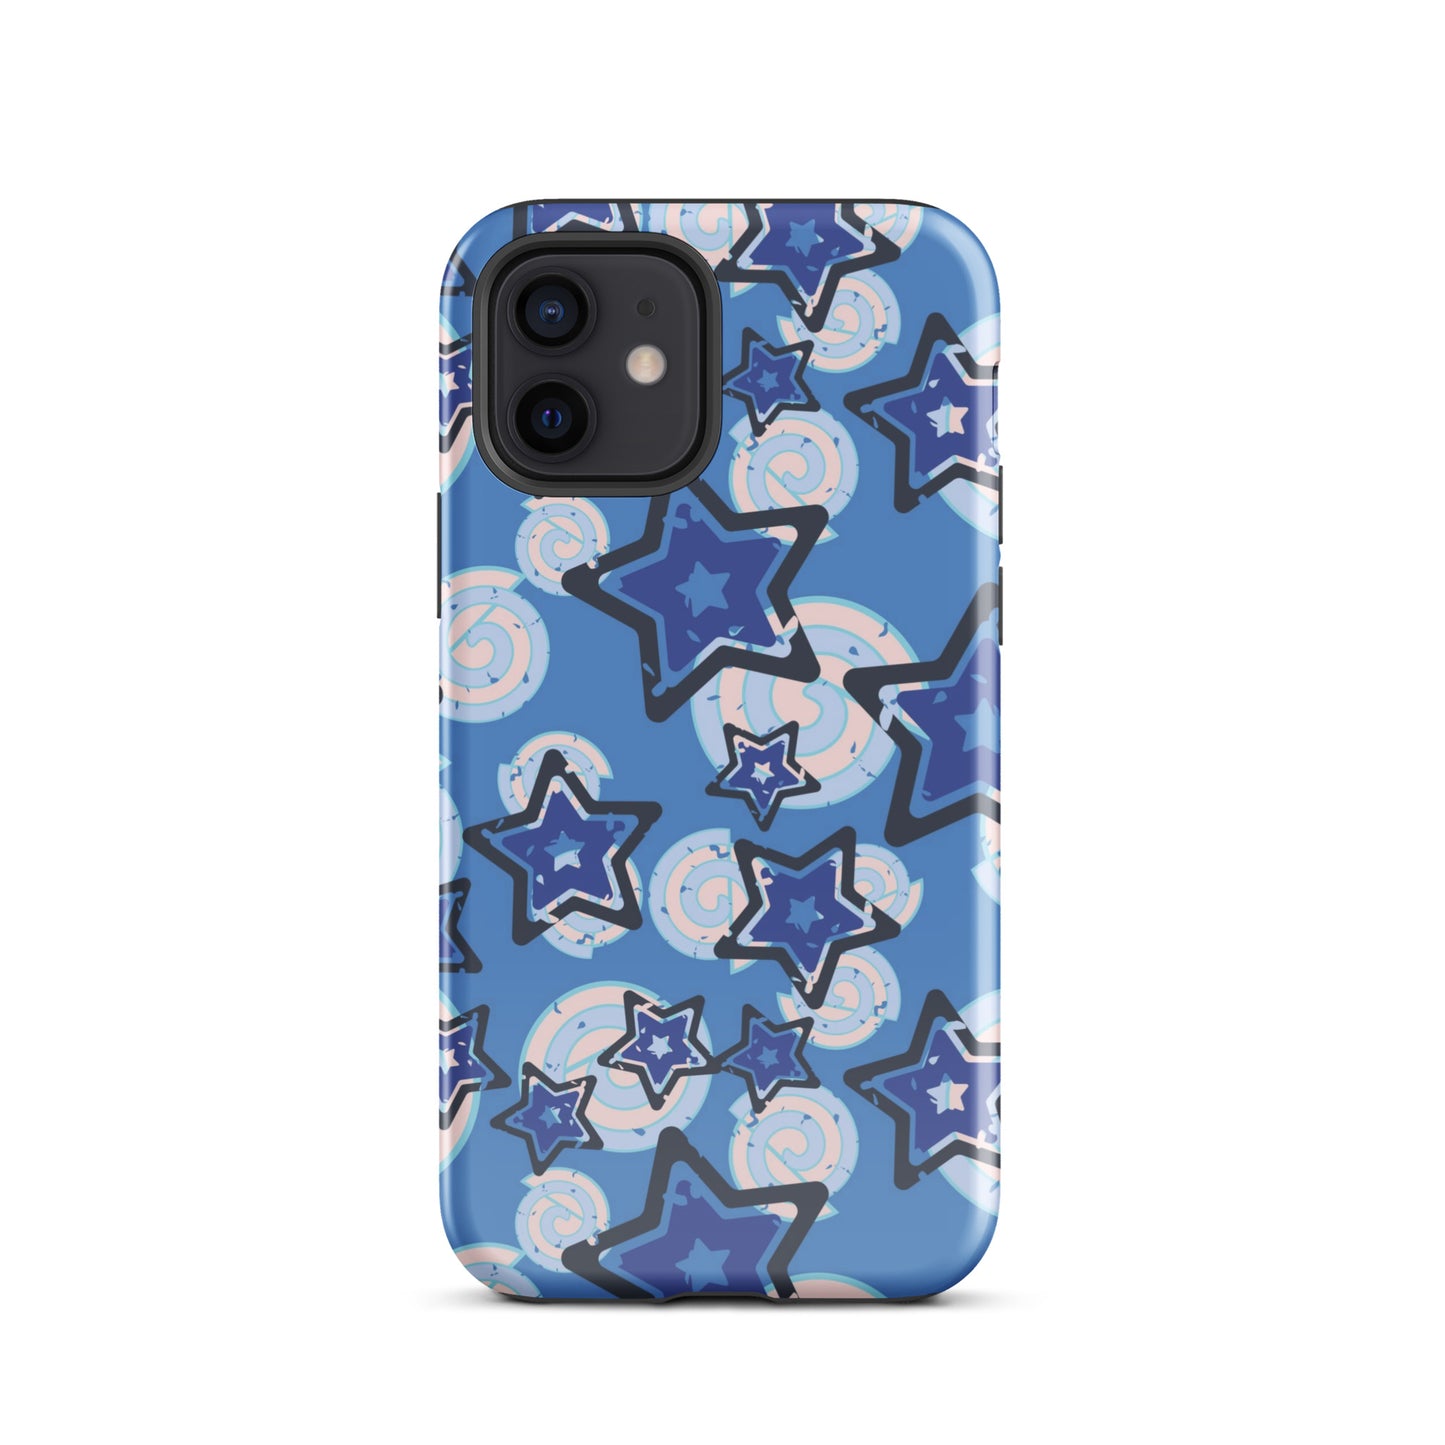 Y2K Blue Star iPhone Case iPhone 12 Glossy